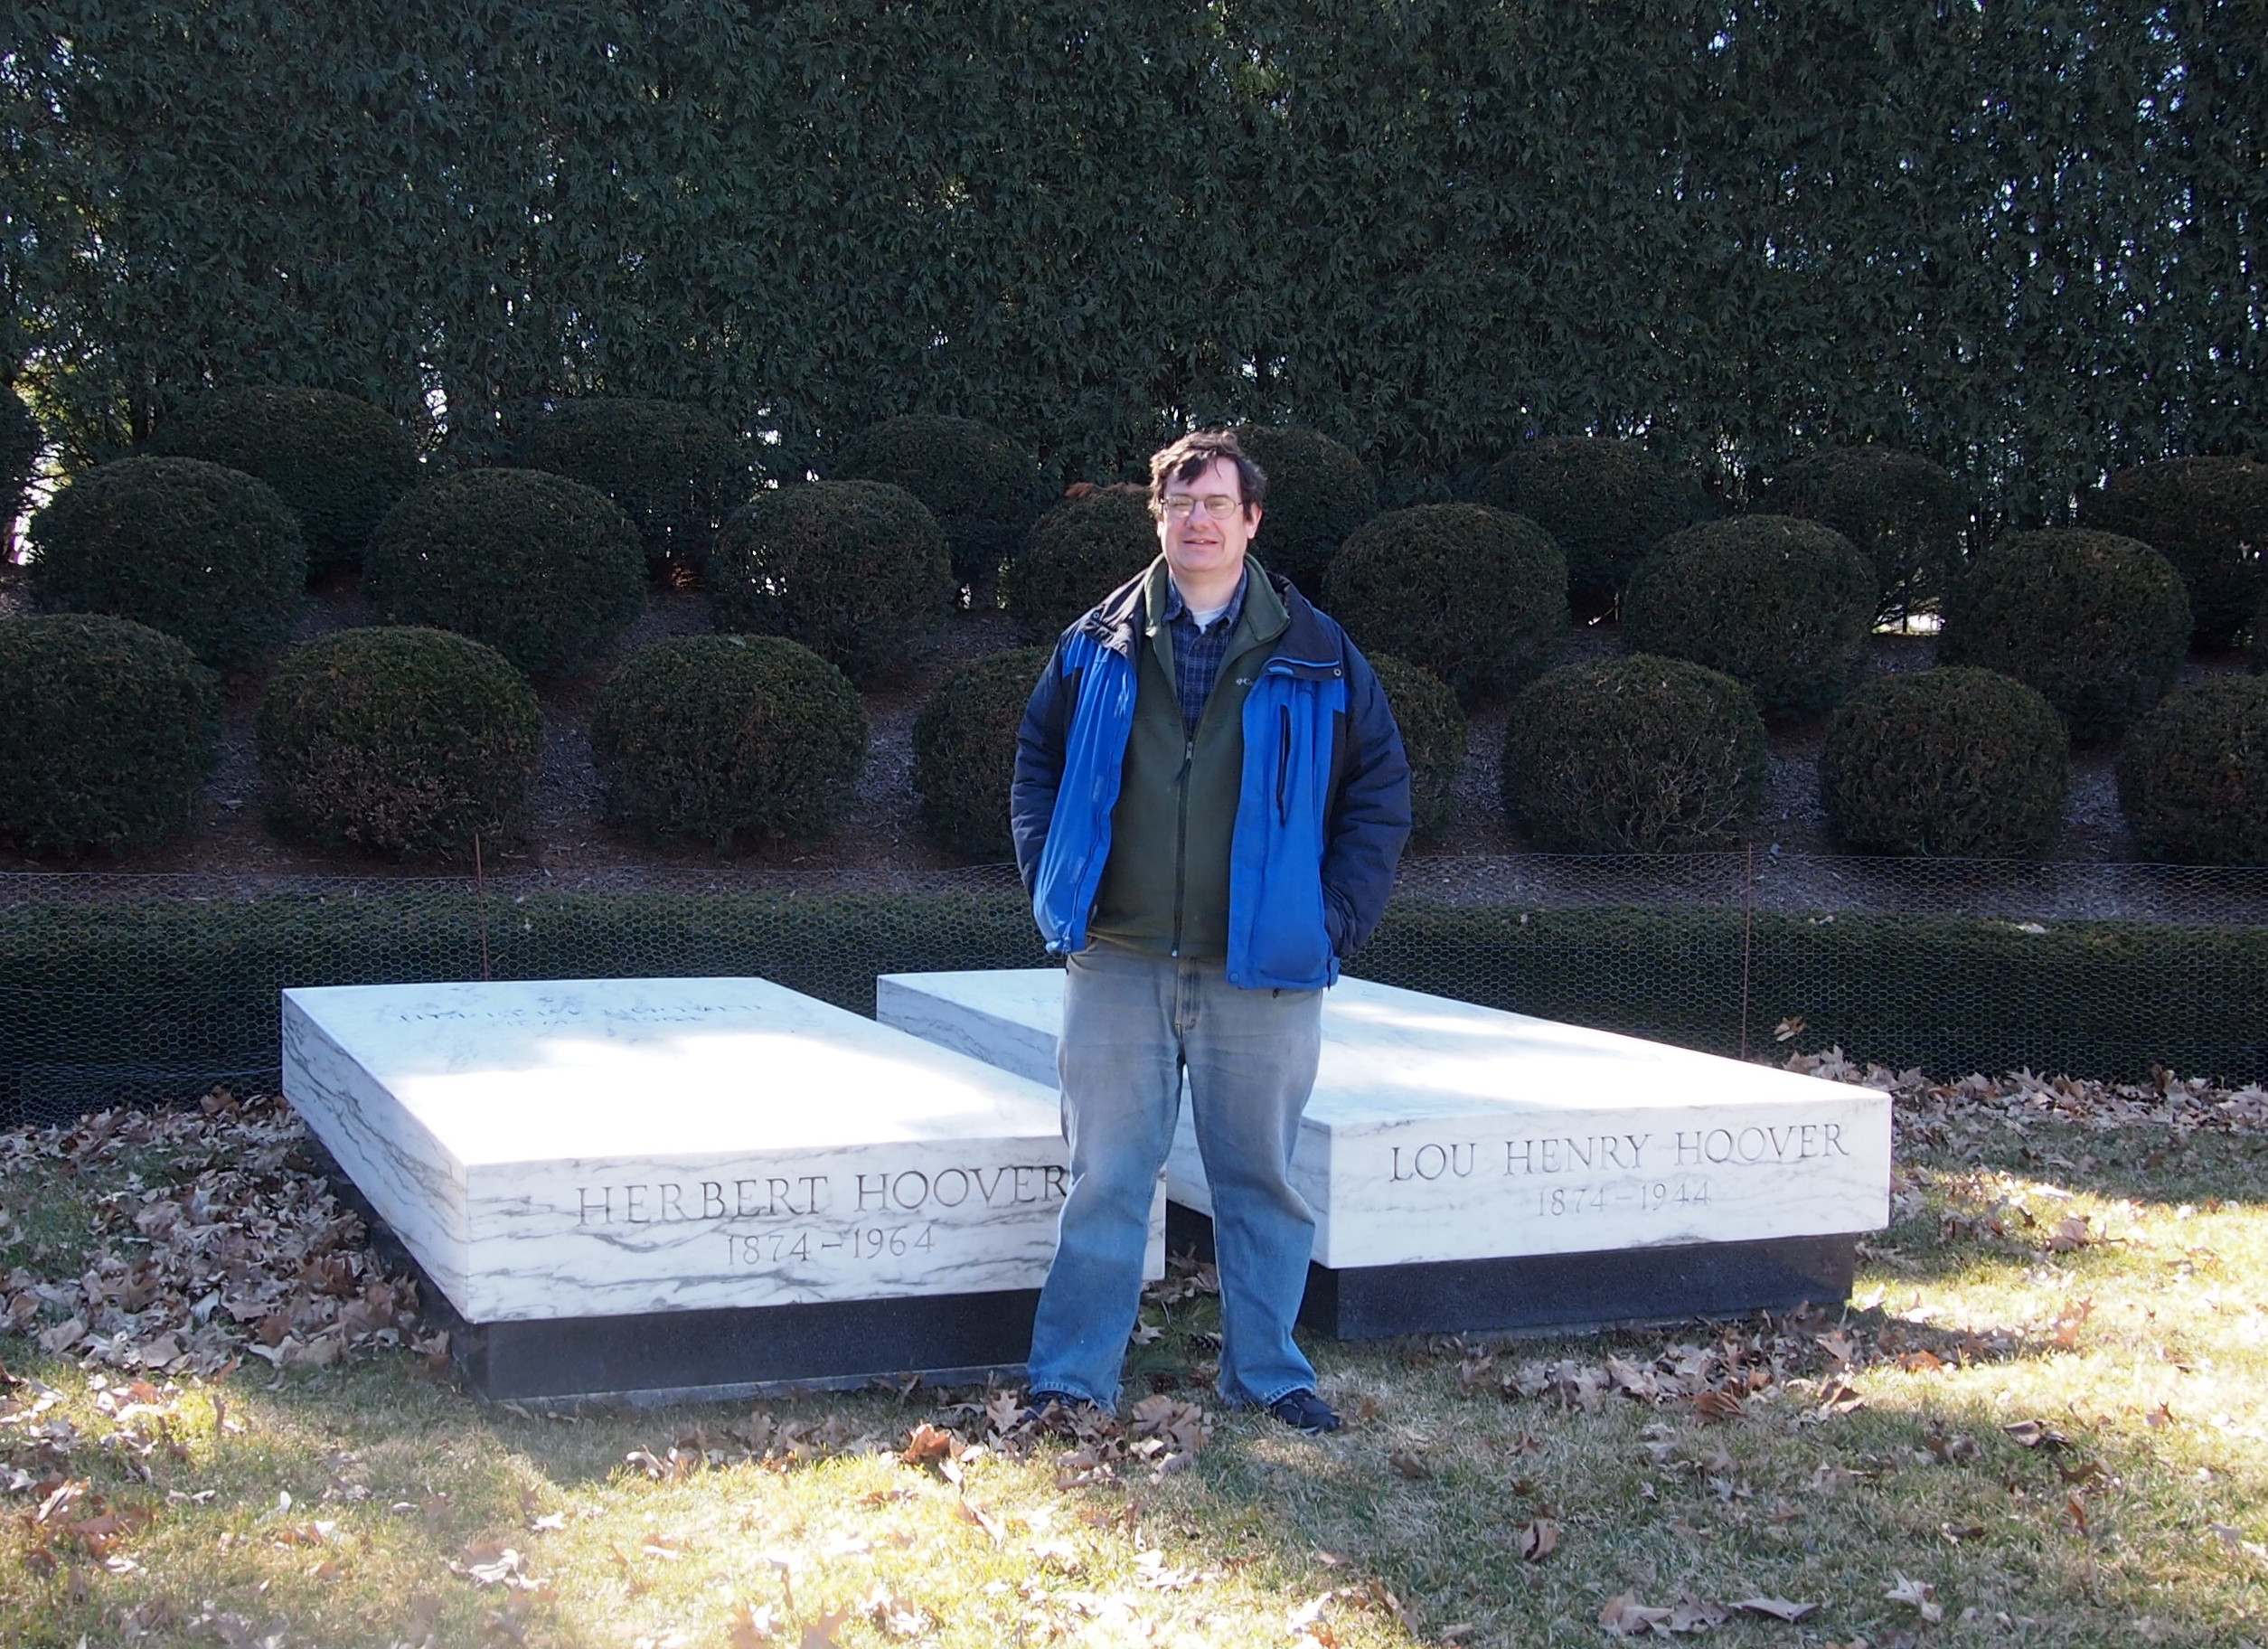 Hoover gravesite March 27, 2015